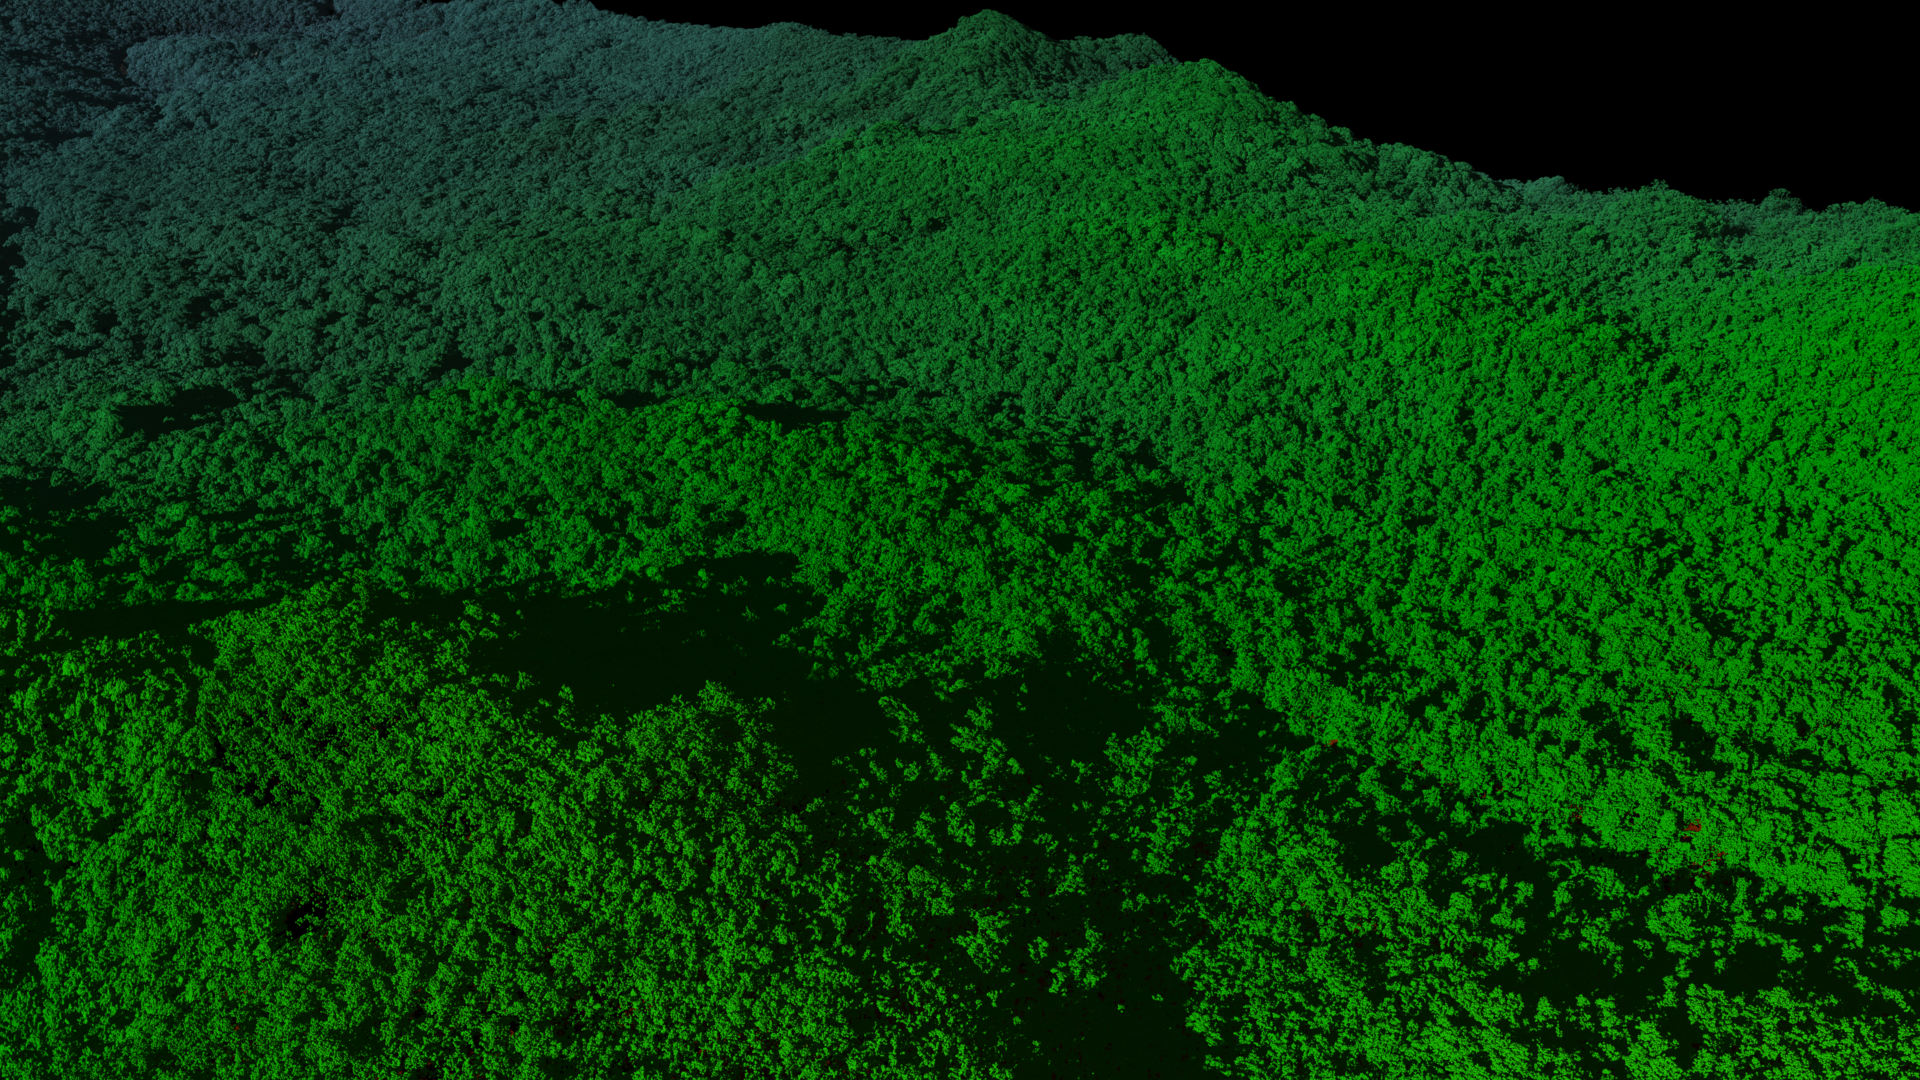 Sample Composite that split screens the lidar swath over the El Yunque National Forest, Puerto Rico. During the split screen, 2017 data is on the upper left and 2018 data on the bottom right. As the camera moves northwest, the viewer can see patches of ground becoming visible in the 2018 data. This is due to the vast numbers of trees that were stripped or fell during Hurricane Maria in September 2017.